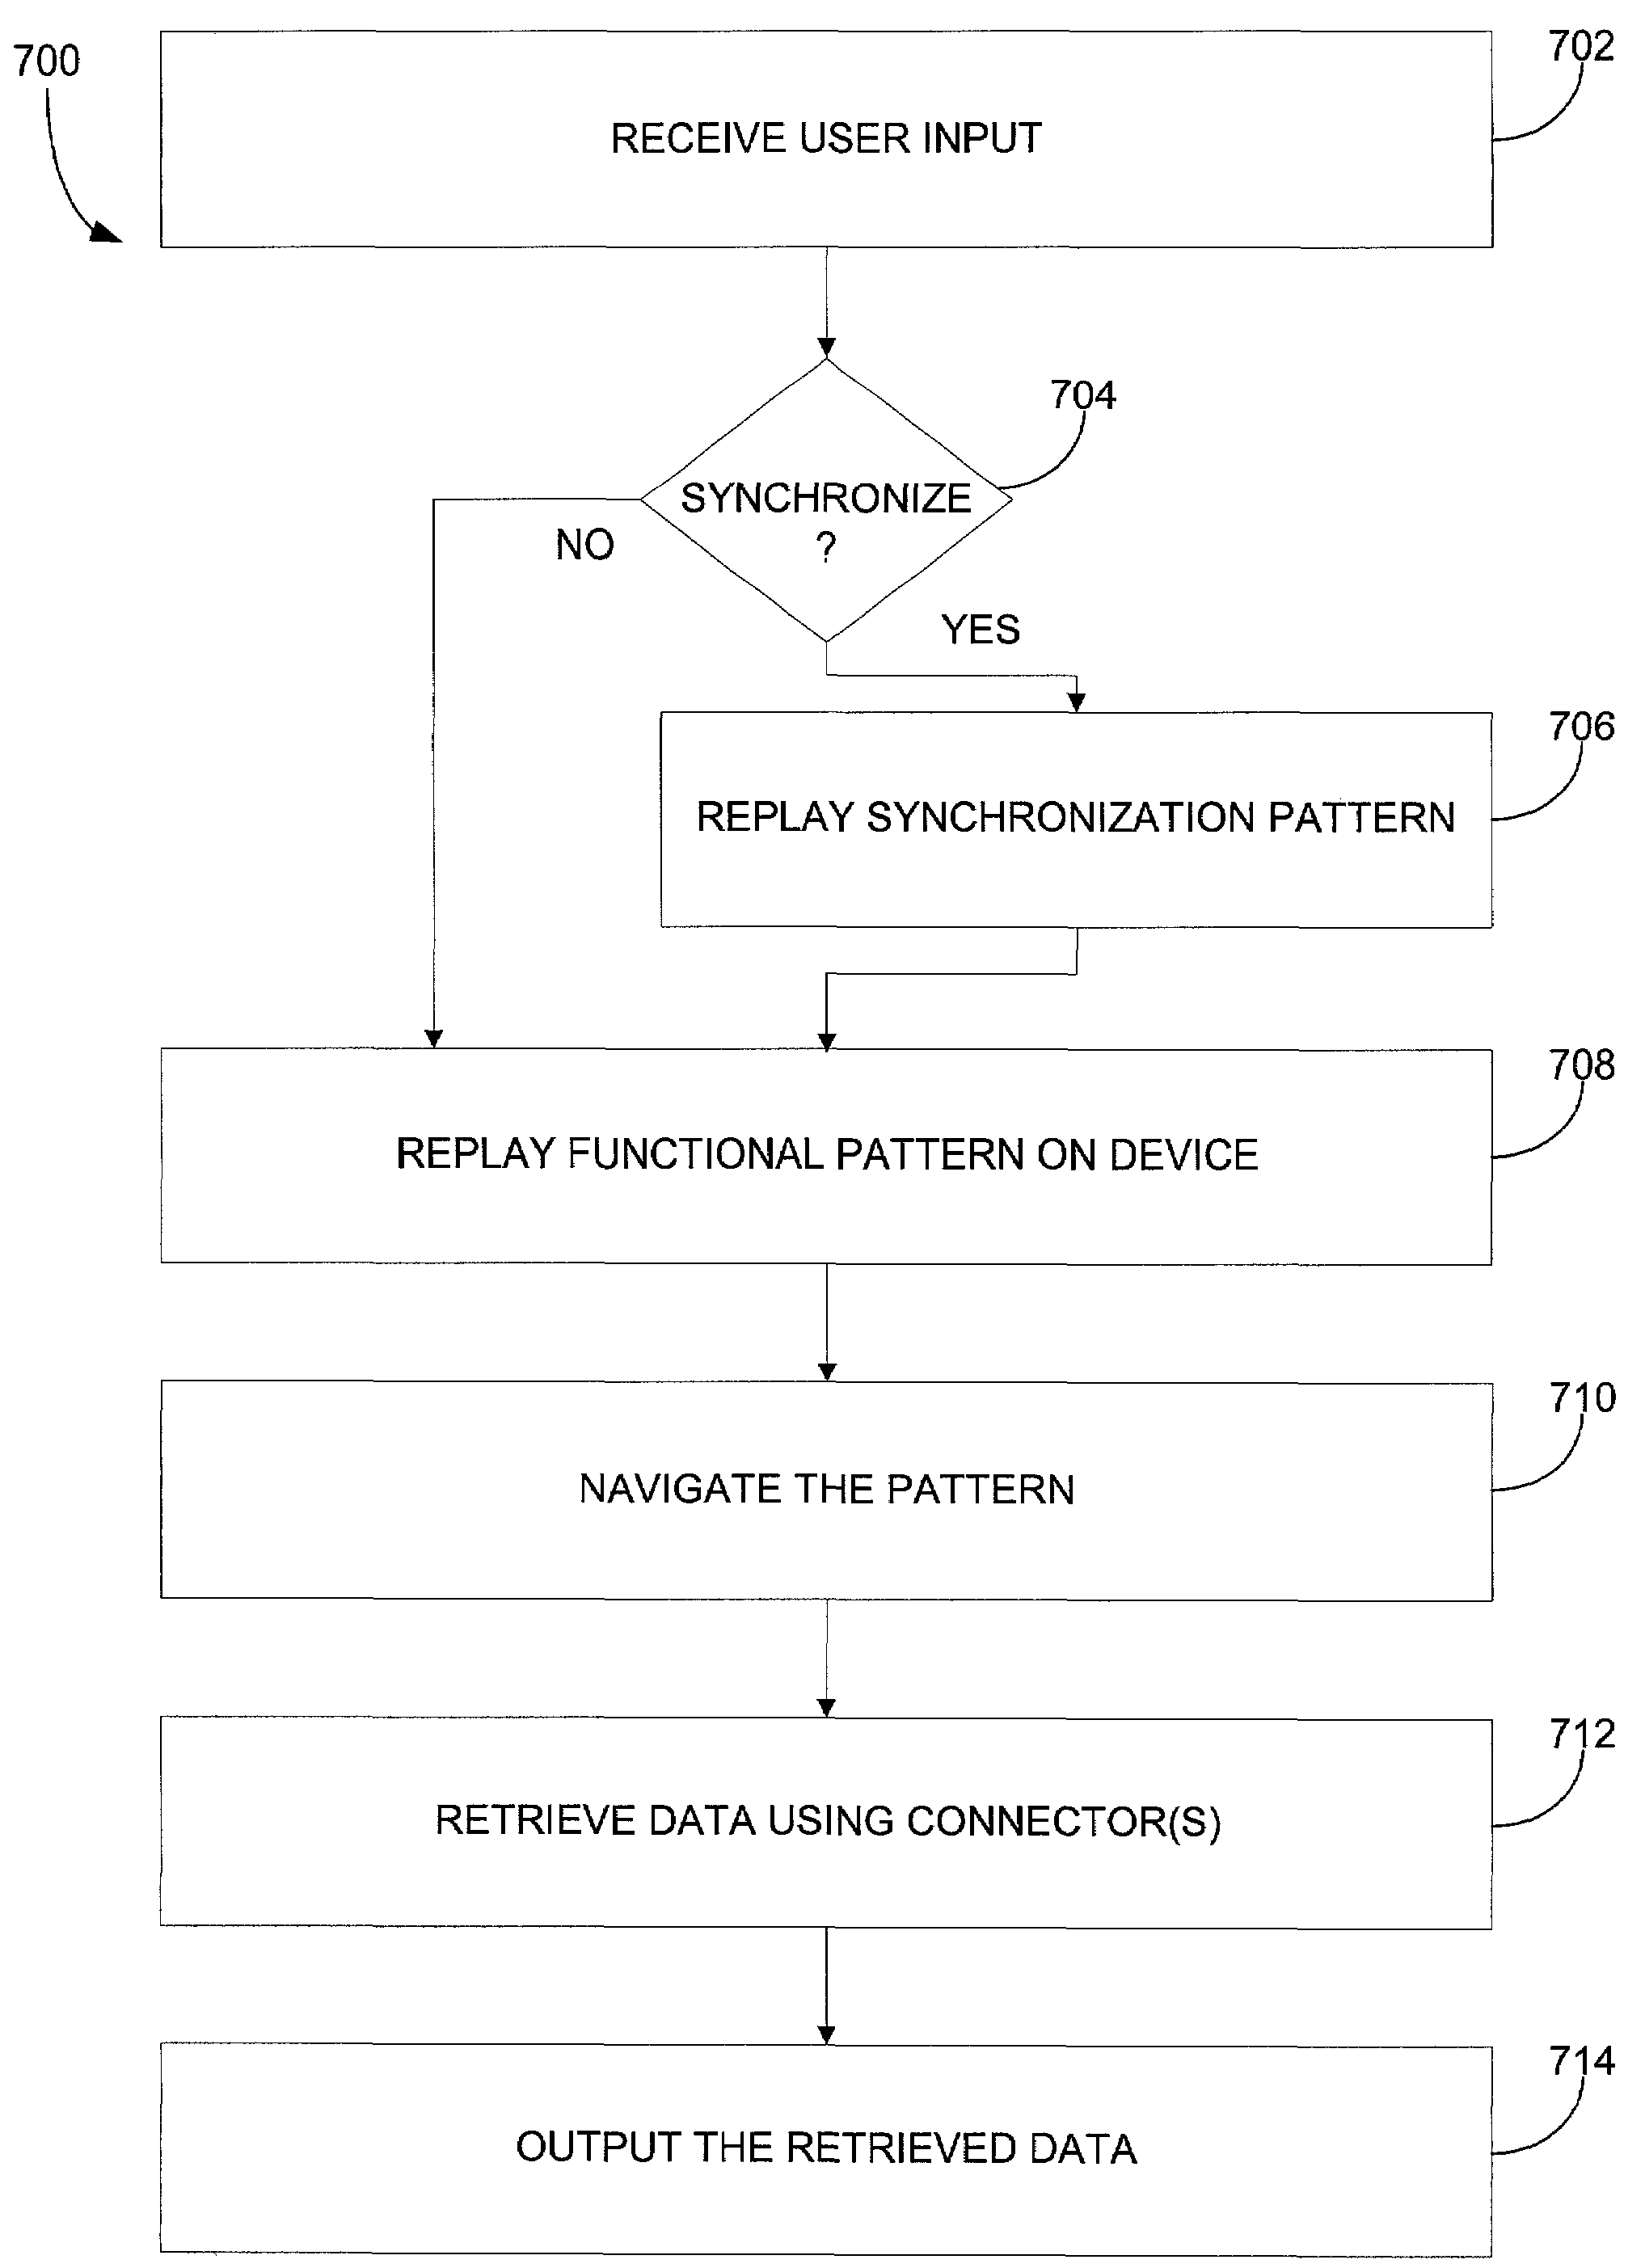 System for replaying and synchronizing patterns on a client and external data source devices